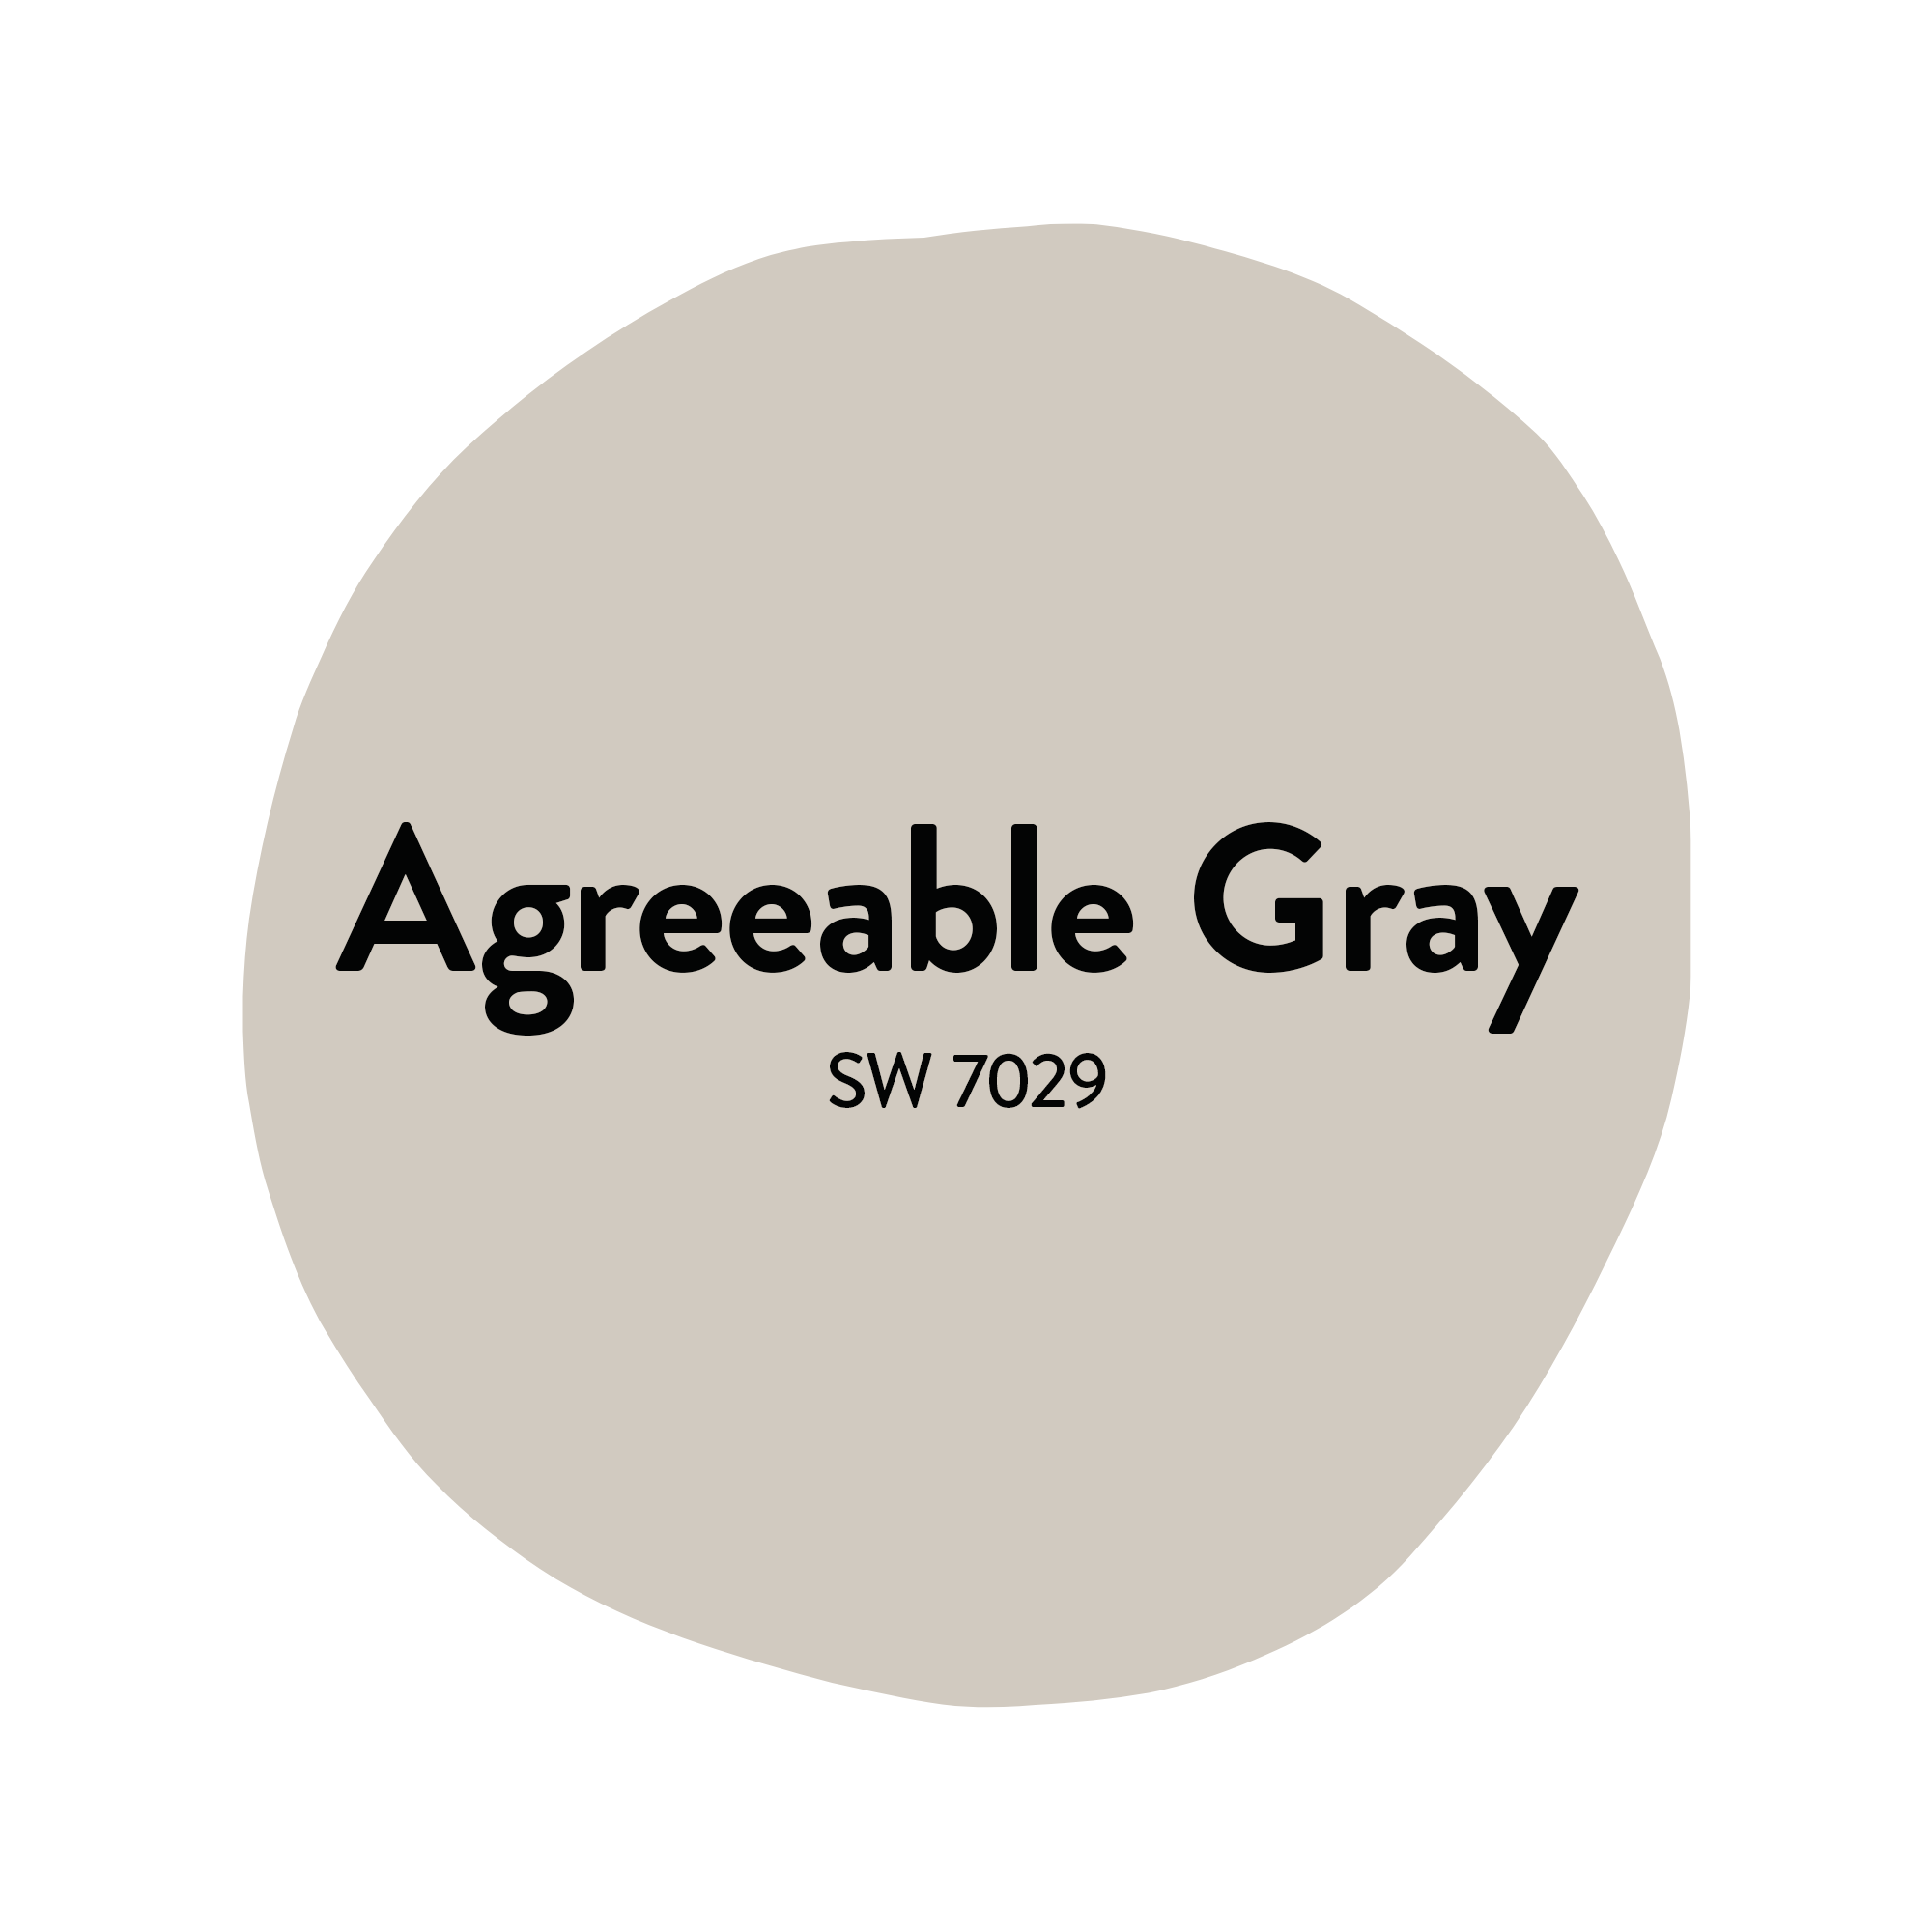 Sherwin Williams' Agreeable Gray - SW 7029 recommended by Sonja Pound